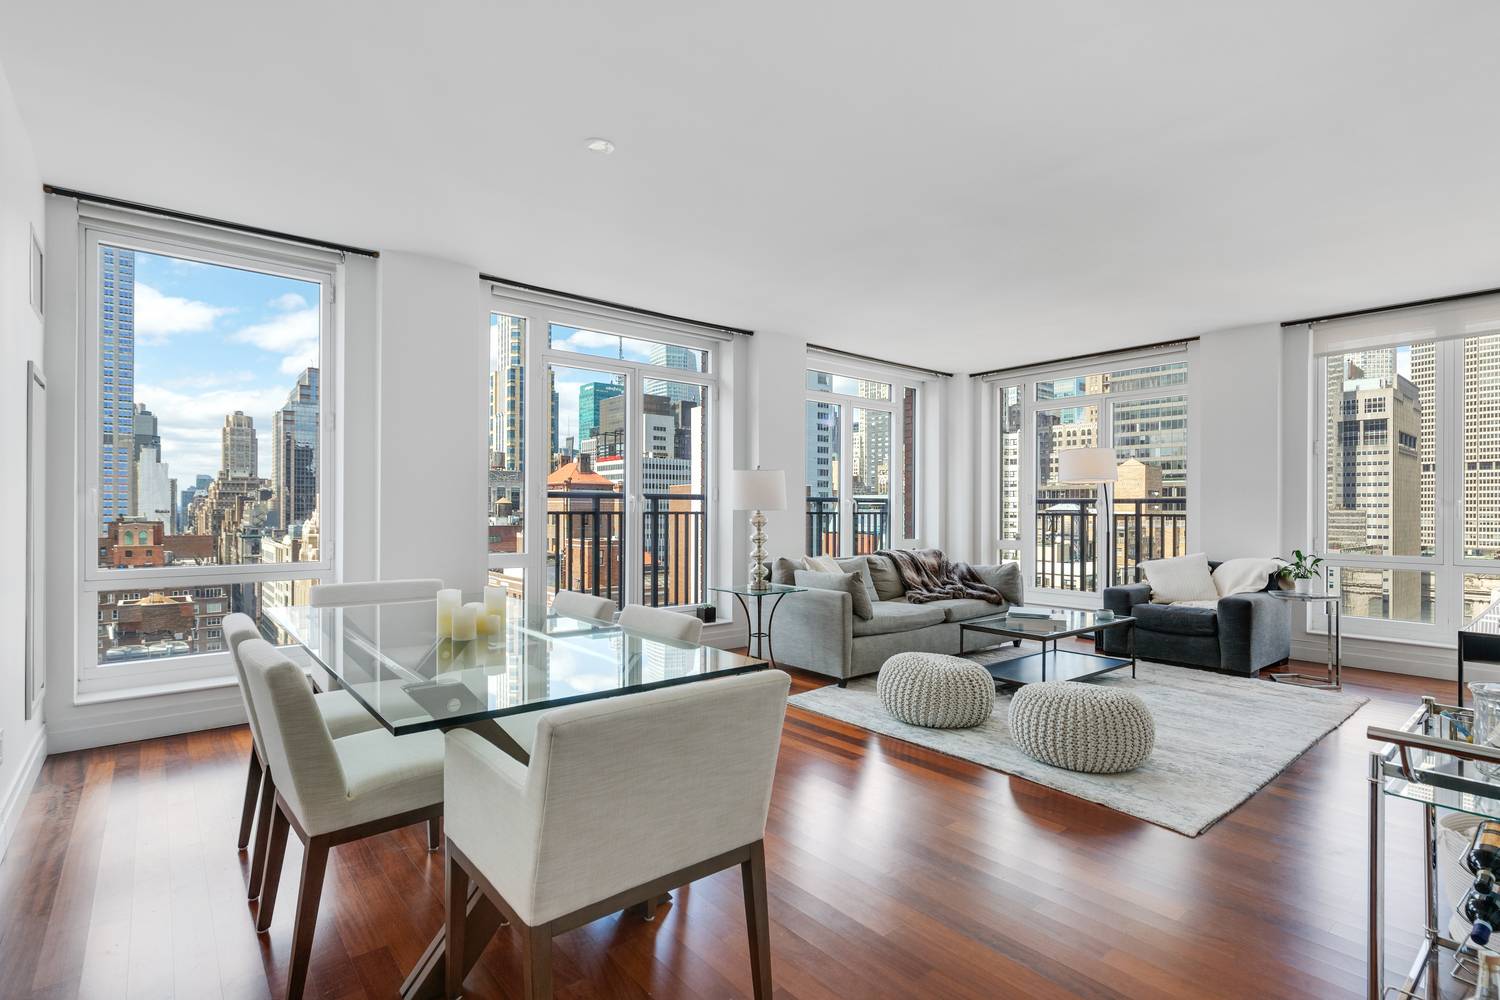 Exquisite Park Avenue Condo with Breathtaking Panoramic views of Manhattan Skyline for Rent !